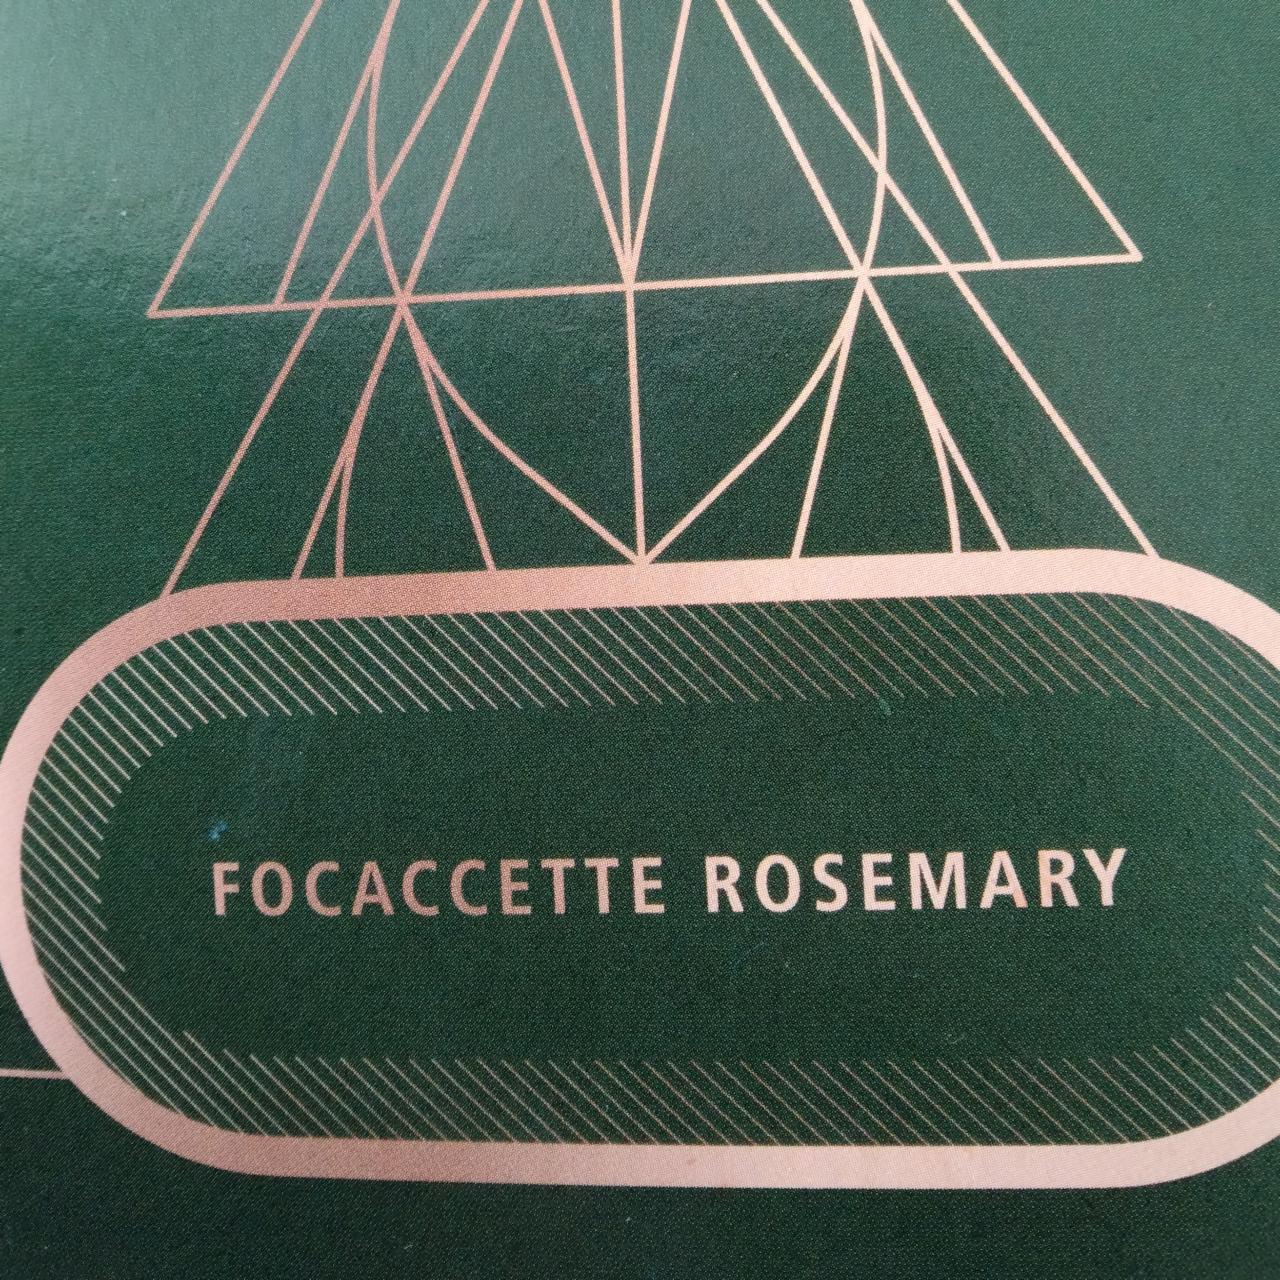 Fotografie - Focaccette rosemary